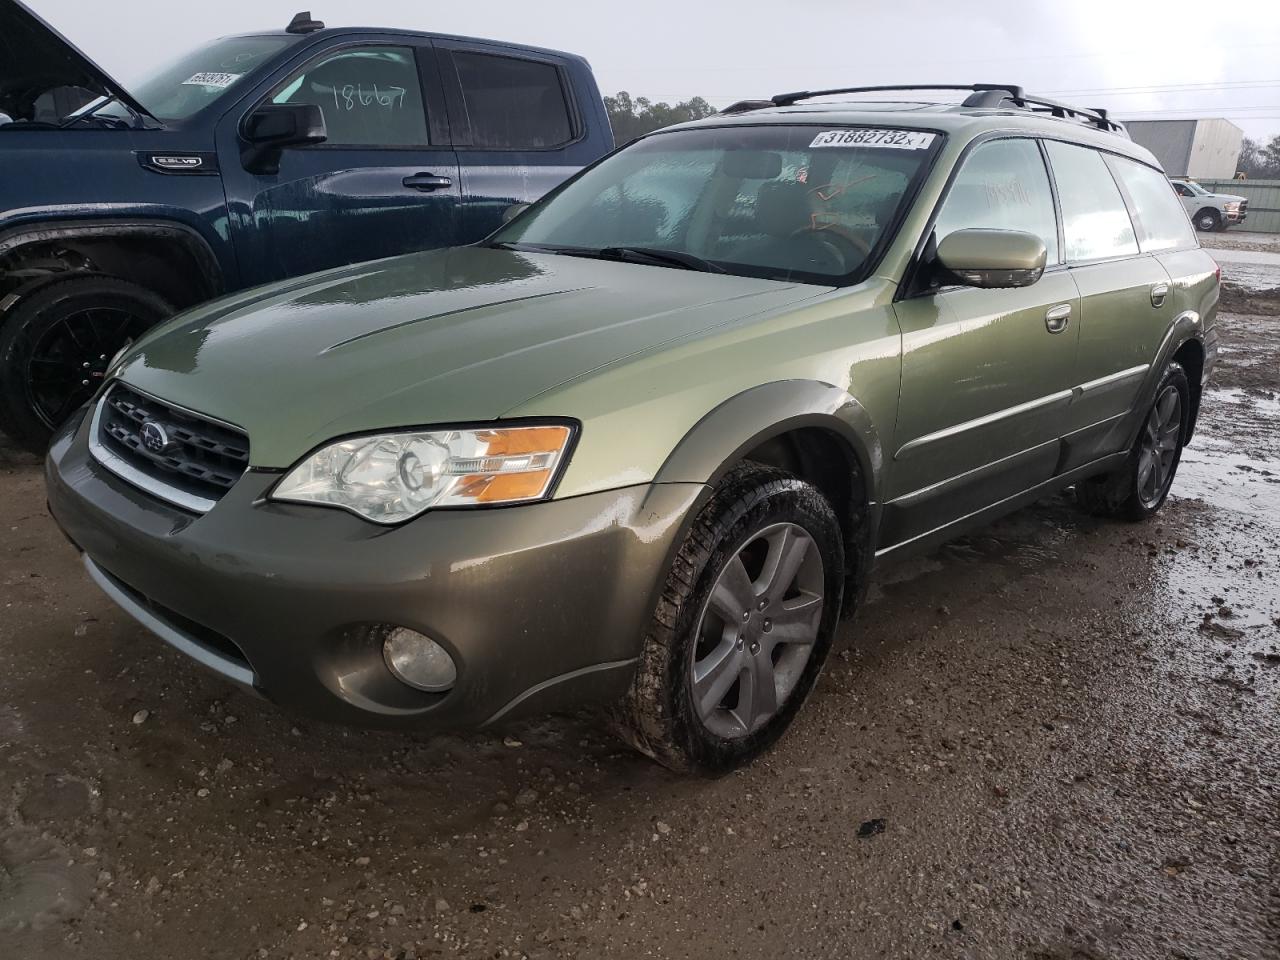 2006 SUBARU LEGACY VIN 4S4BP86C964317275 from the USA